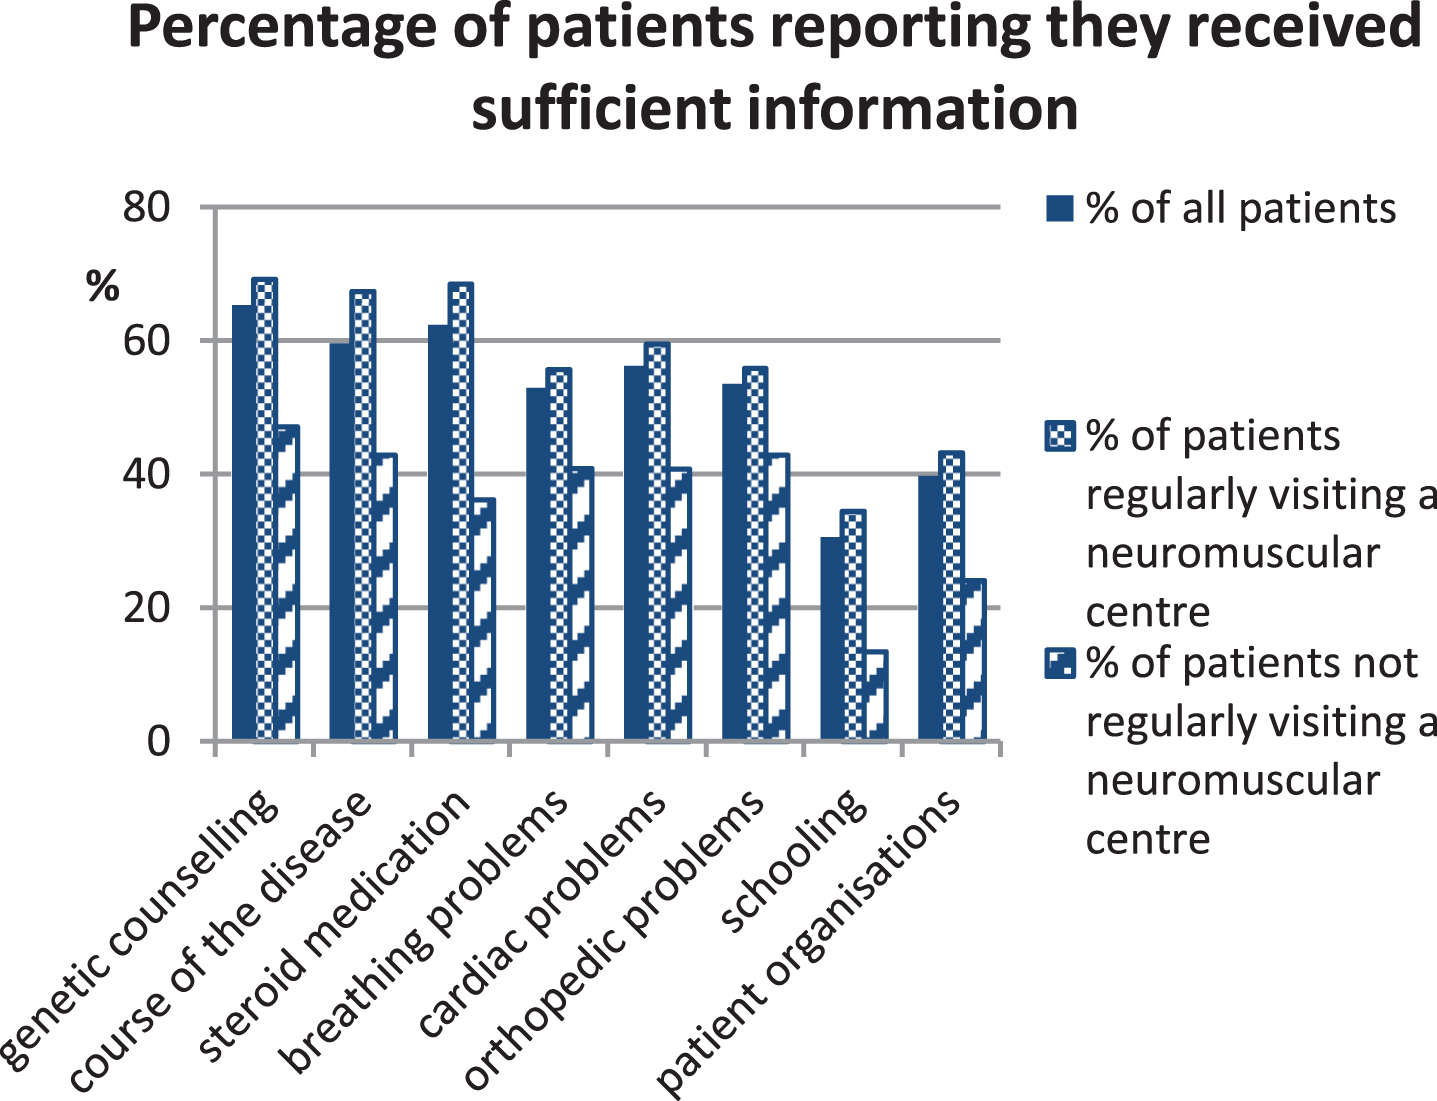 Percentage of patients that felt sufficiently informed by their physician about various aspects of Duchenne muscular dystrophy. The group of patients reporting insufficient information about breathing problems was composed of 47.1% ambulatory and 61.0% non-ambulatory patients.